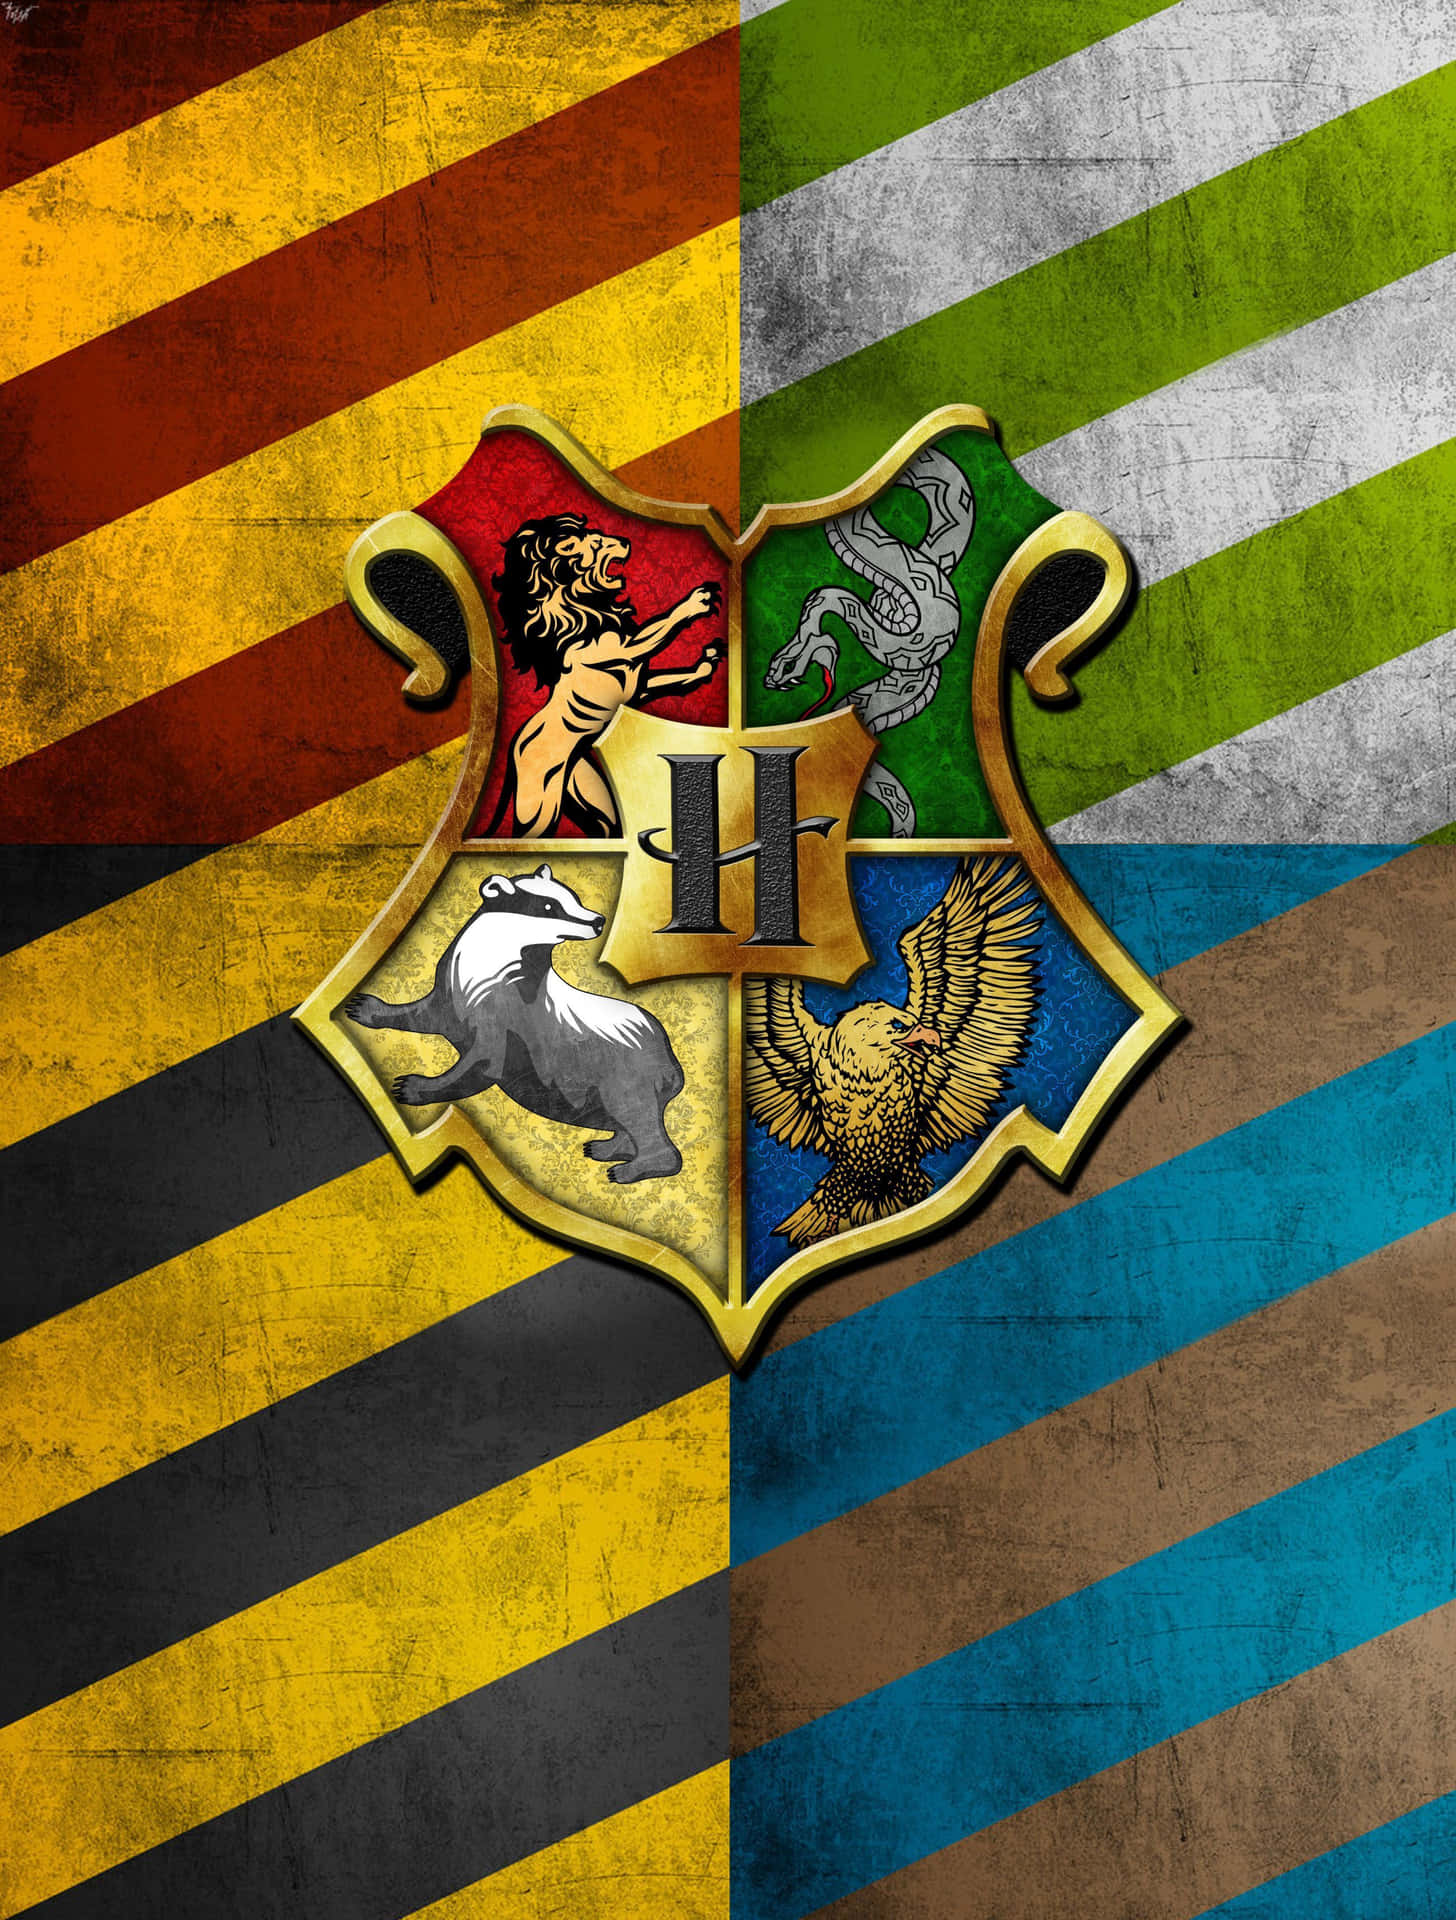 100+] Harry Potter Houses Wallpapers